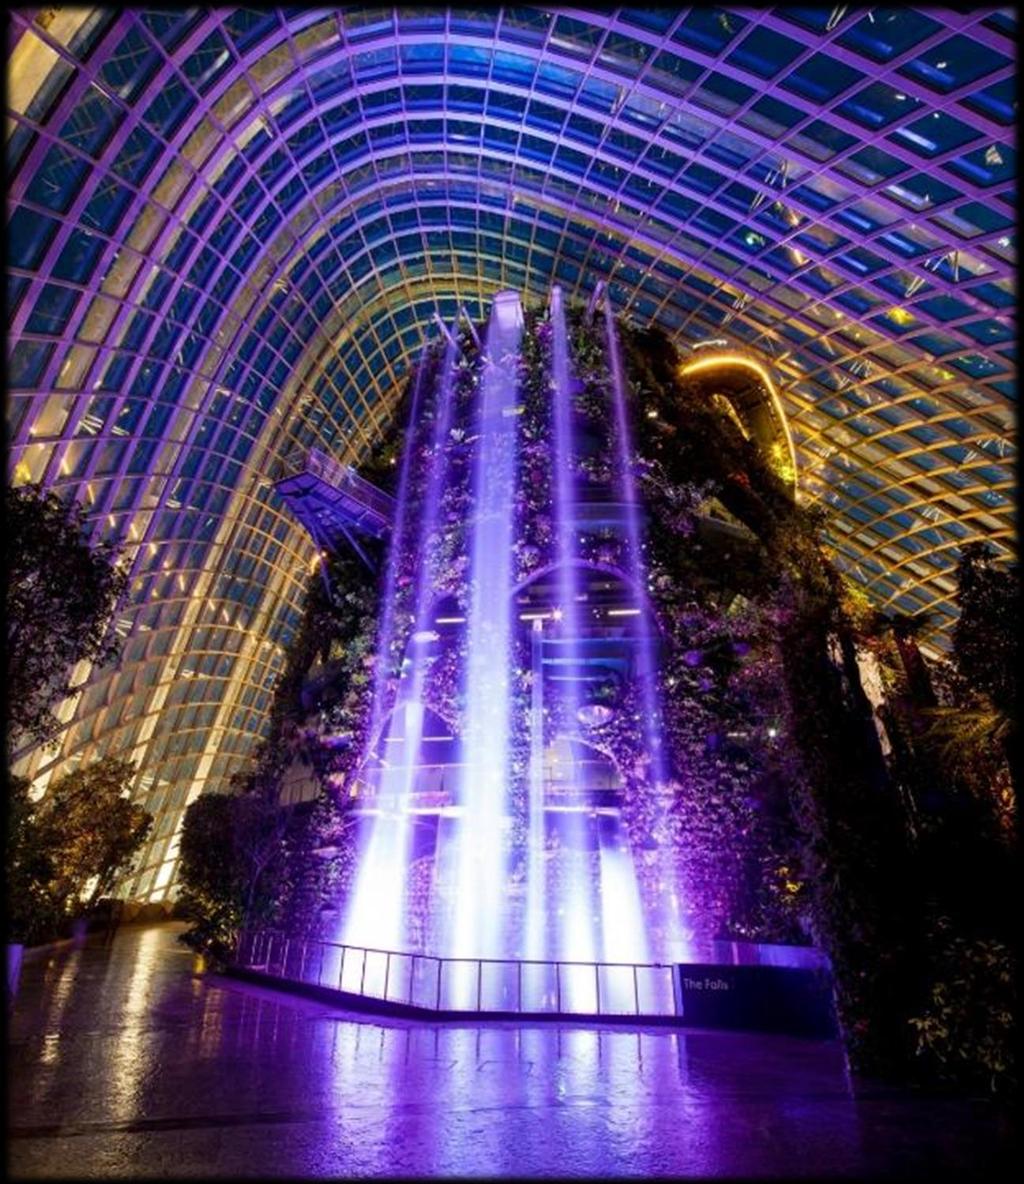 World tallest Indoor waterfall at 35-metre as well as 6 discovery